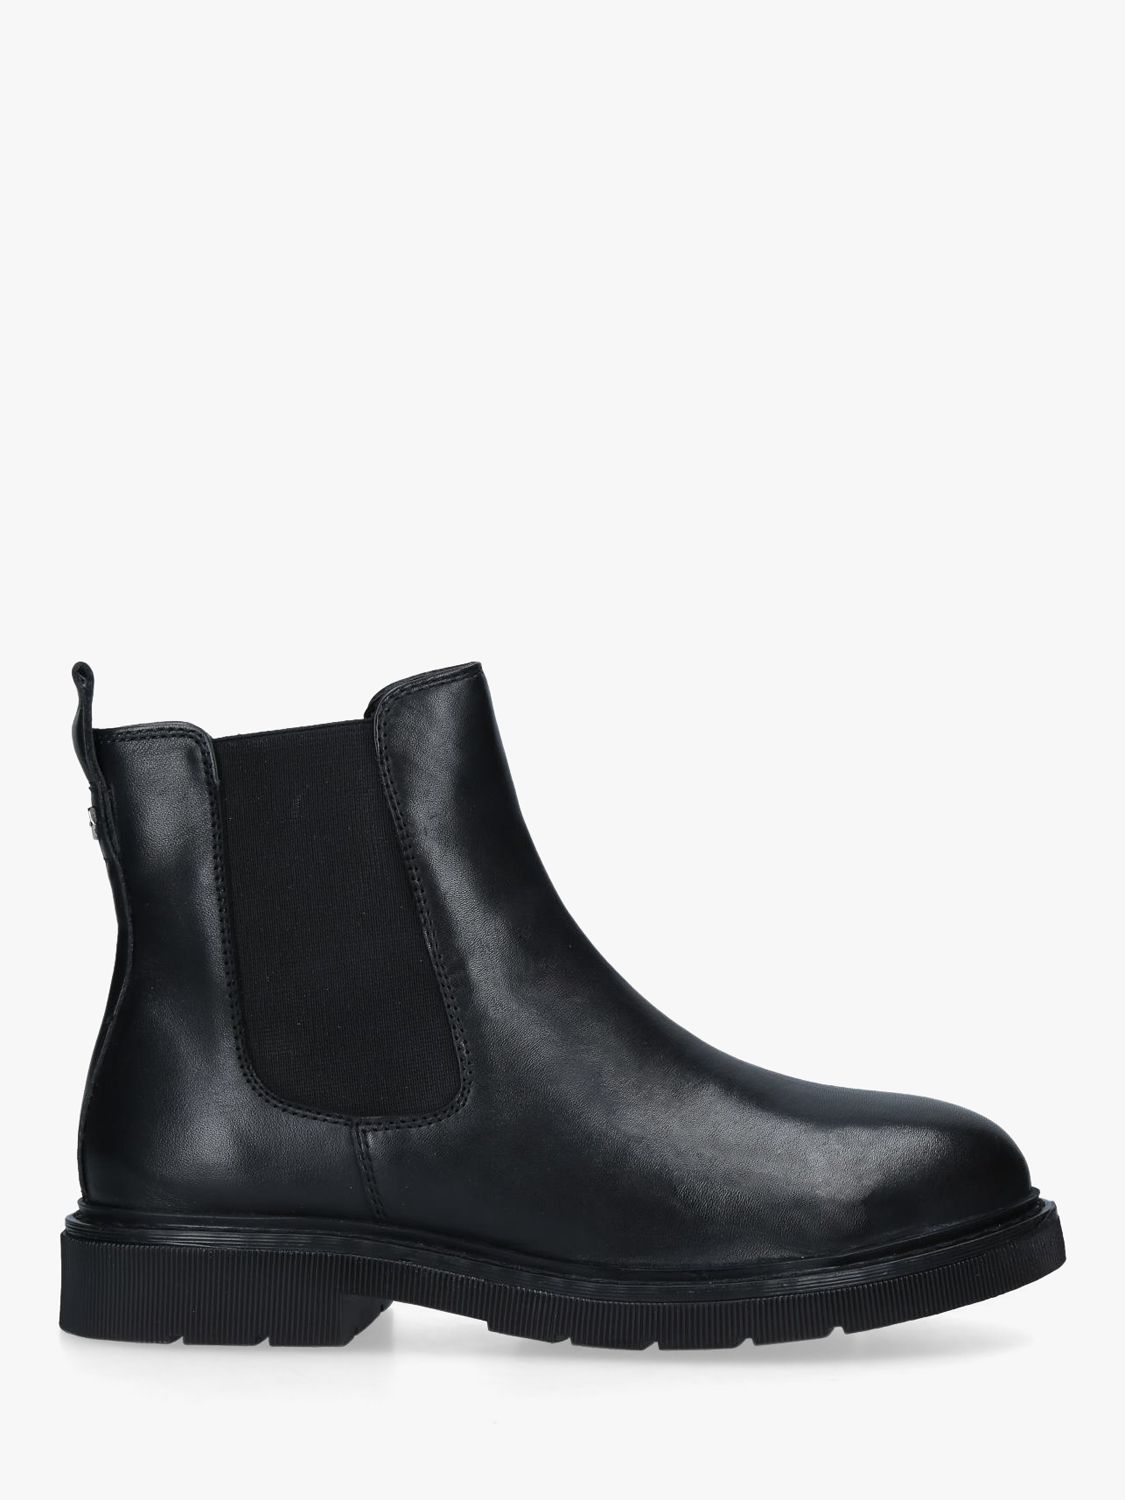 Carvela Strategy Leather Chelsea Boots, Black, 5